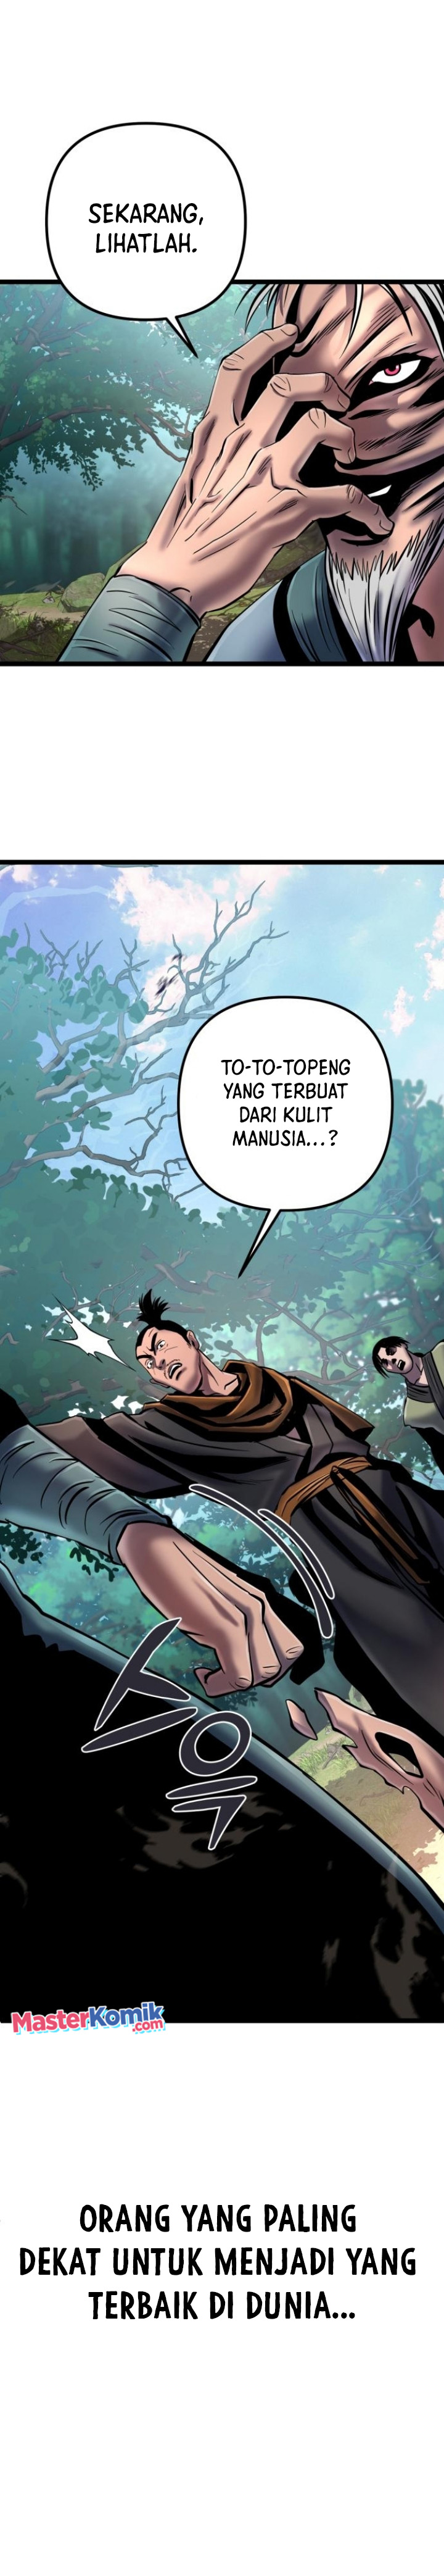 Ha Buk Paeng’s Youngest Son Chapter 57 40